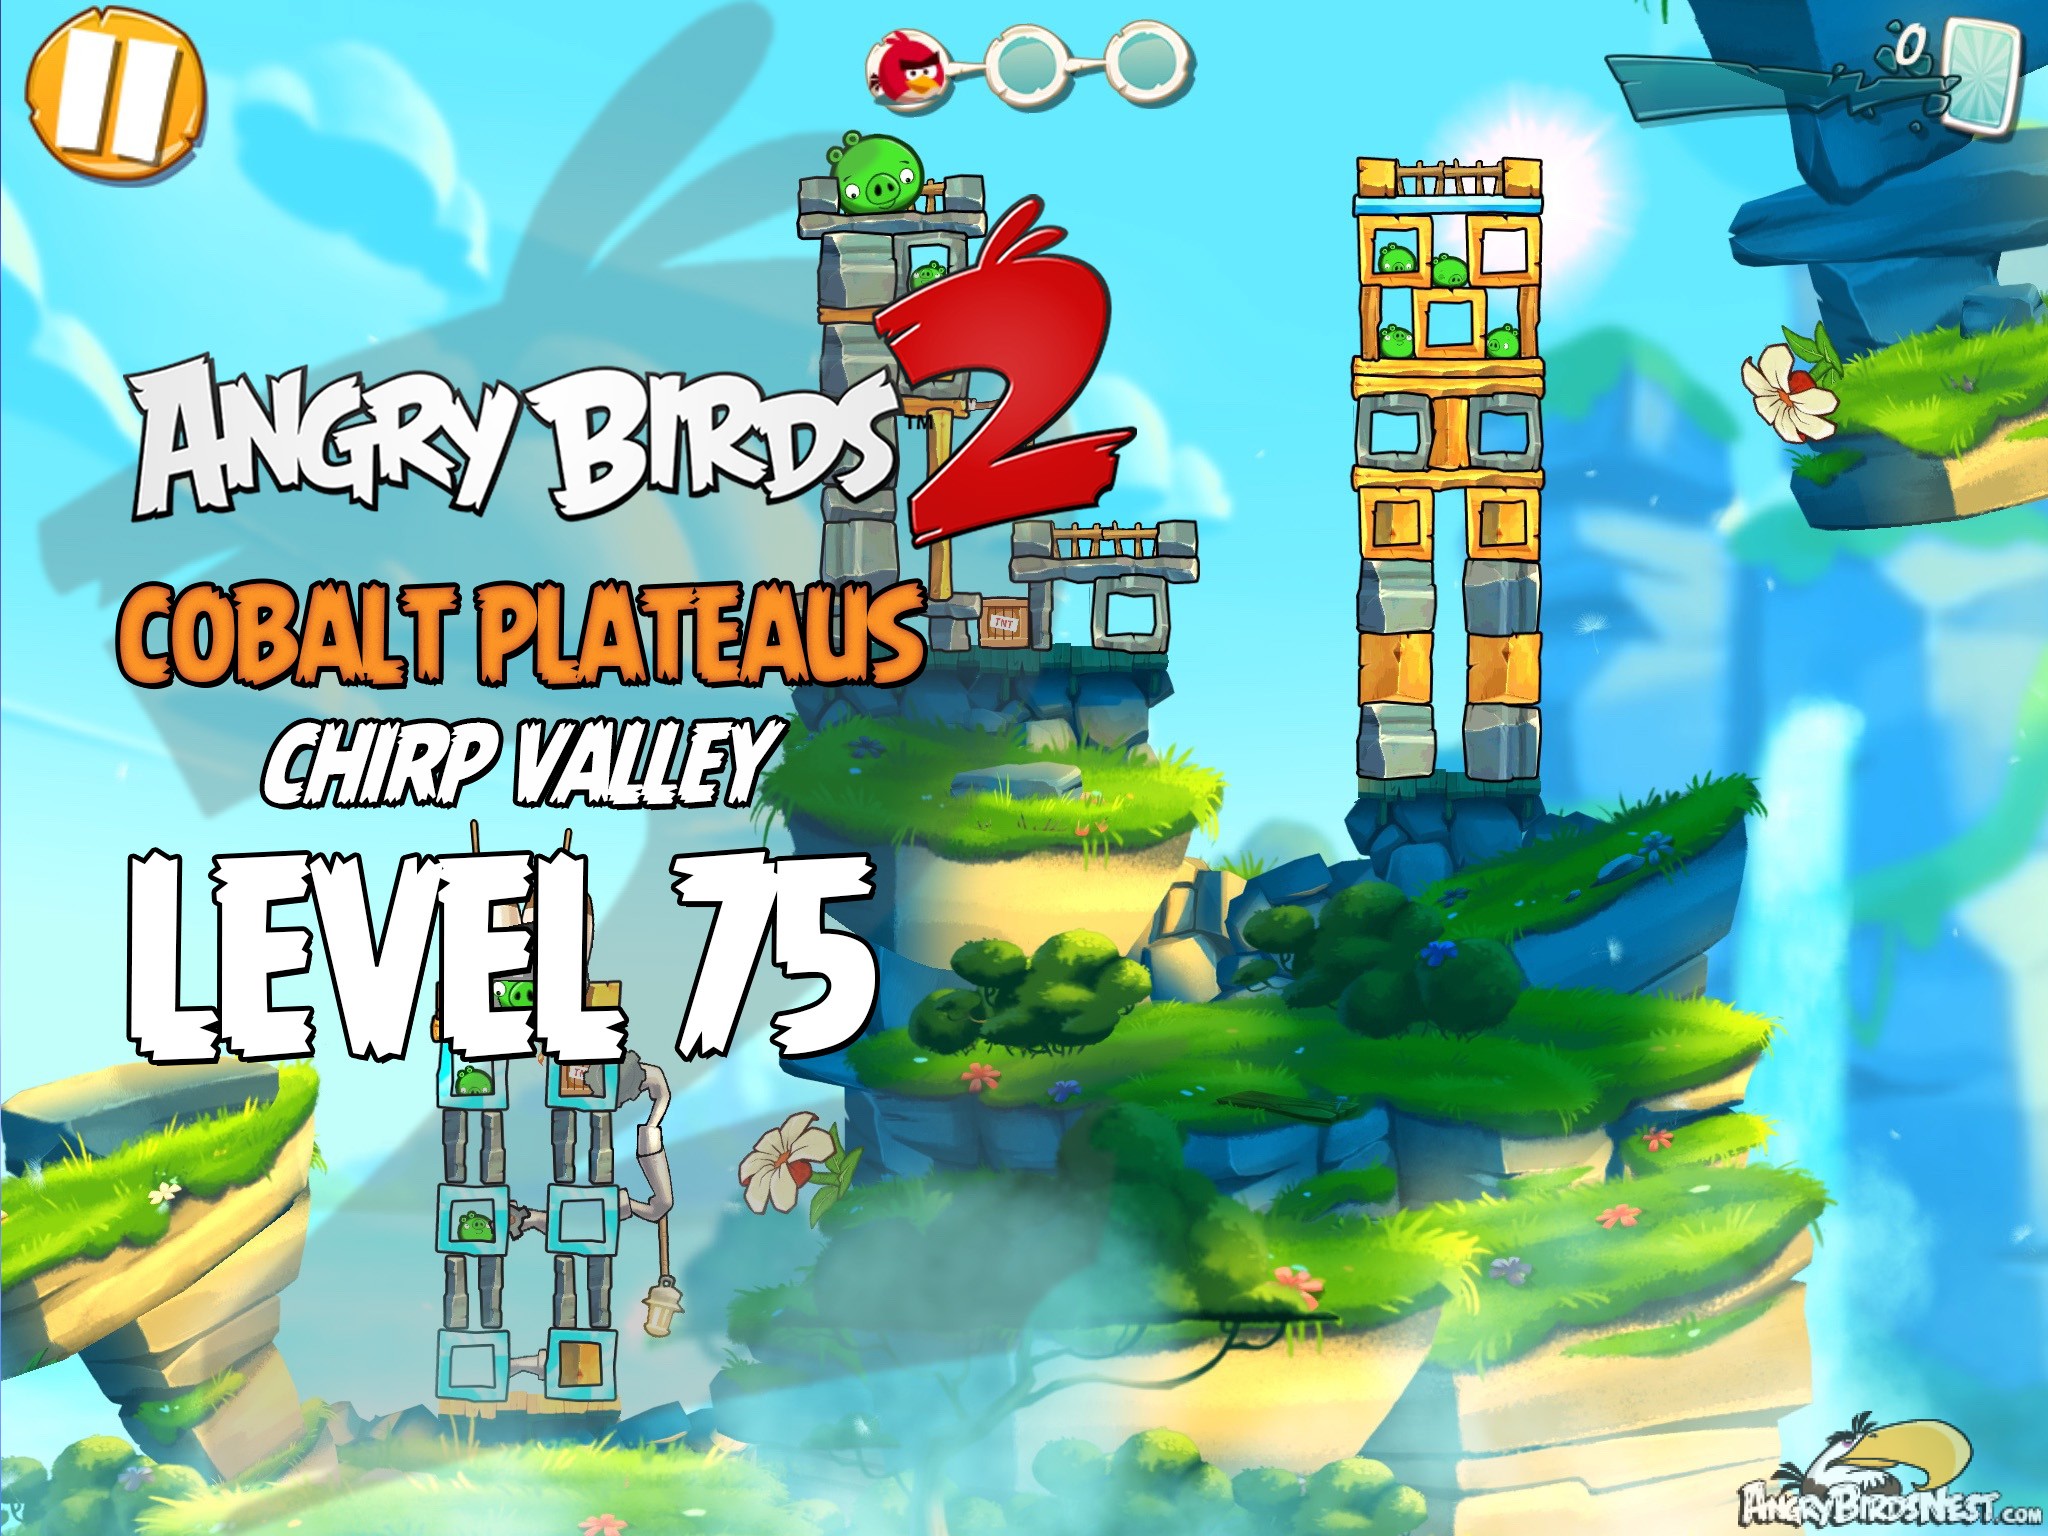 Angry Birds 2 Cobalt Plateaus Chirp Valley Level 75